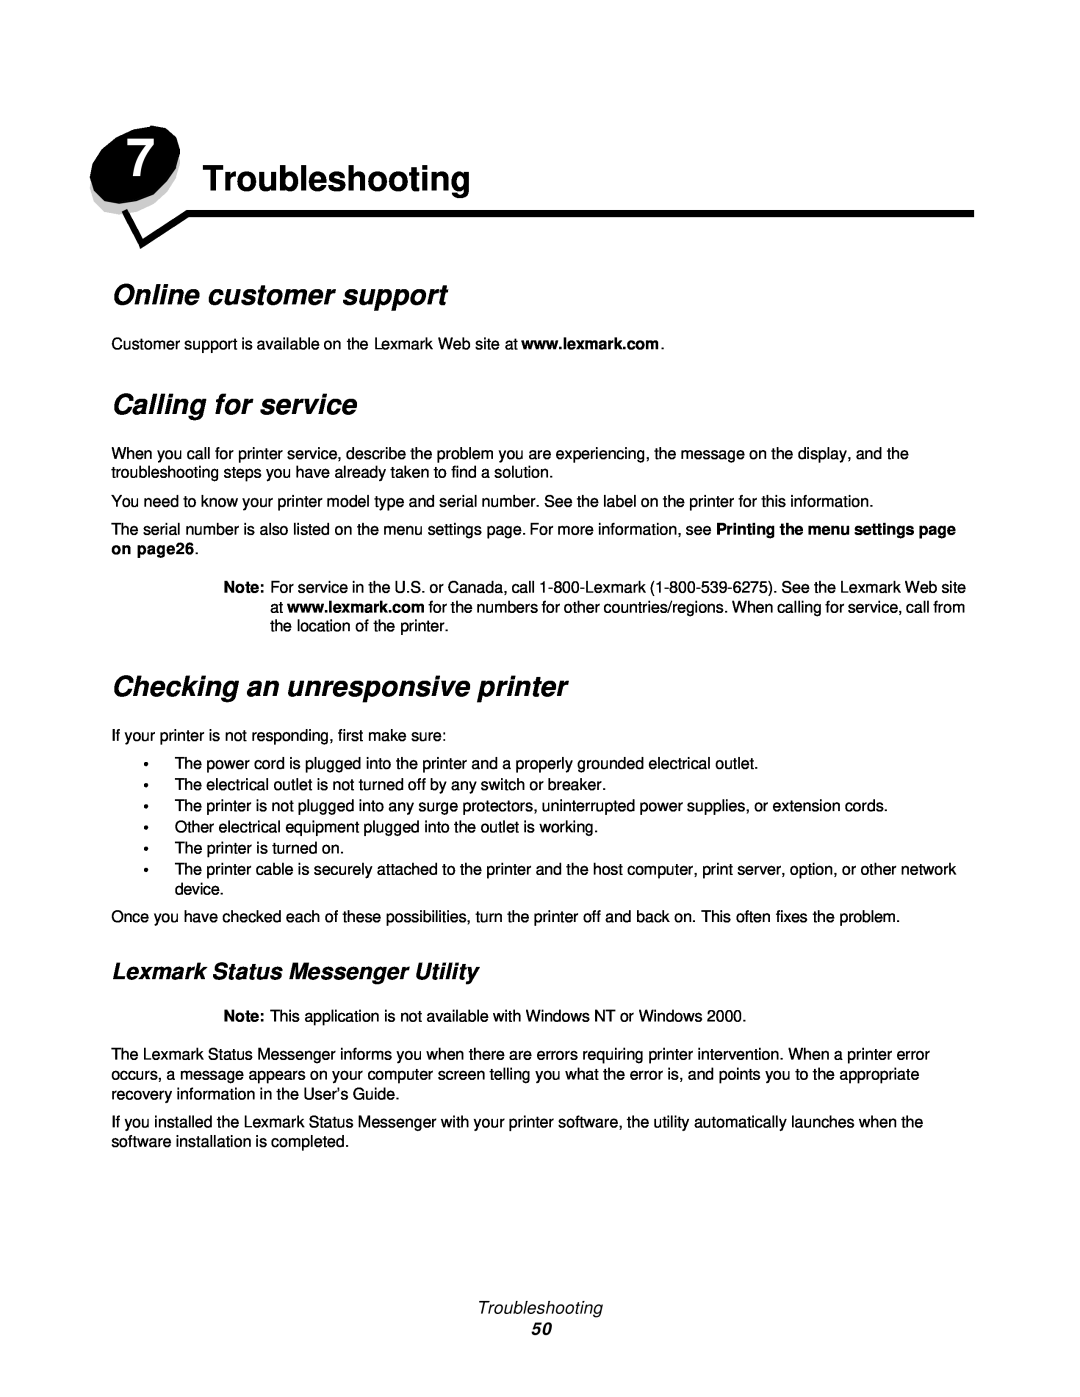 Lexmark 350d manual Troubleshooting, Online customer support, Calling for service, Checking an unresponsive printer 